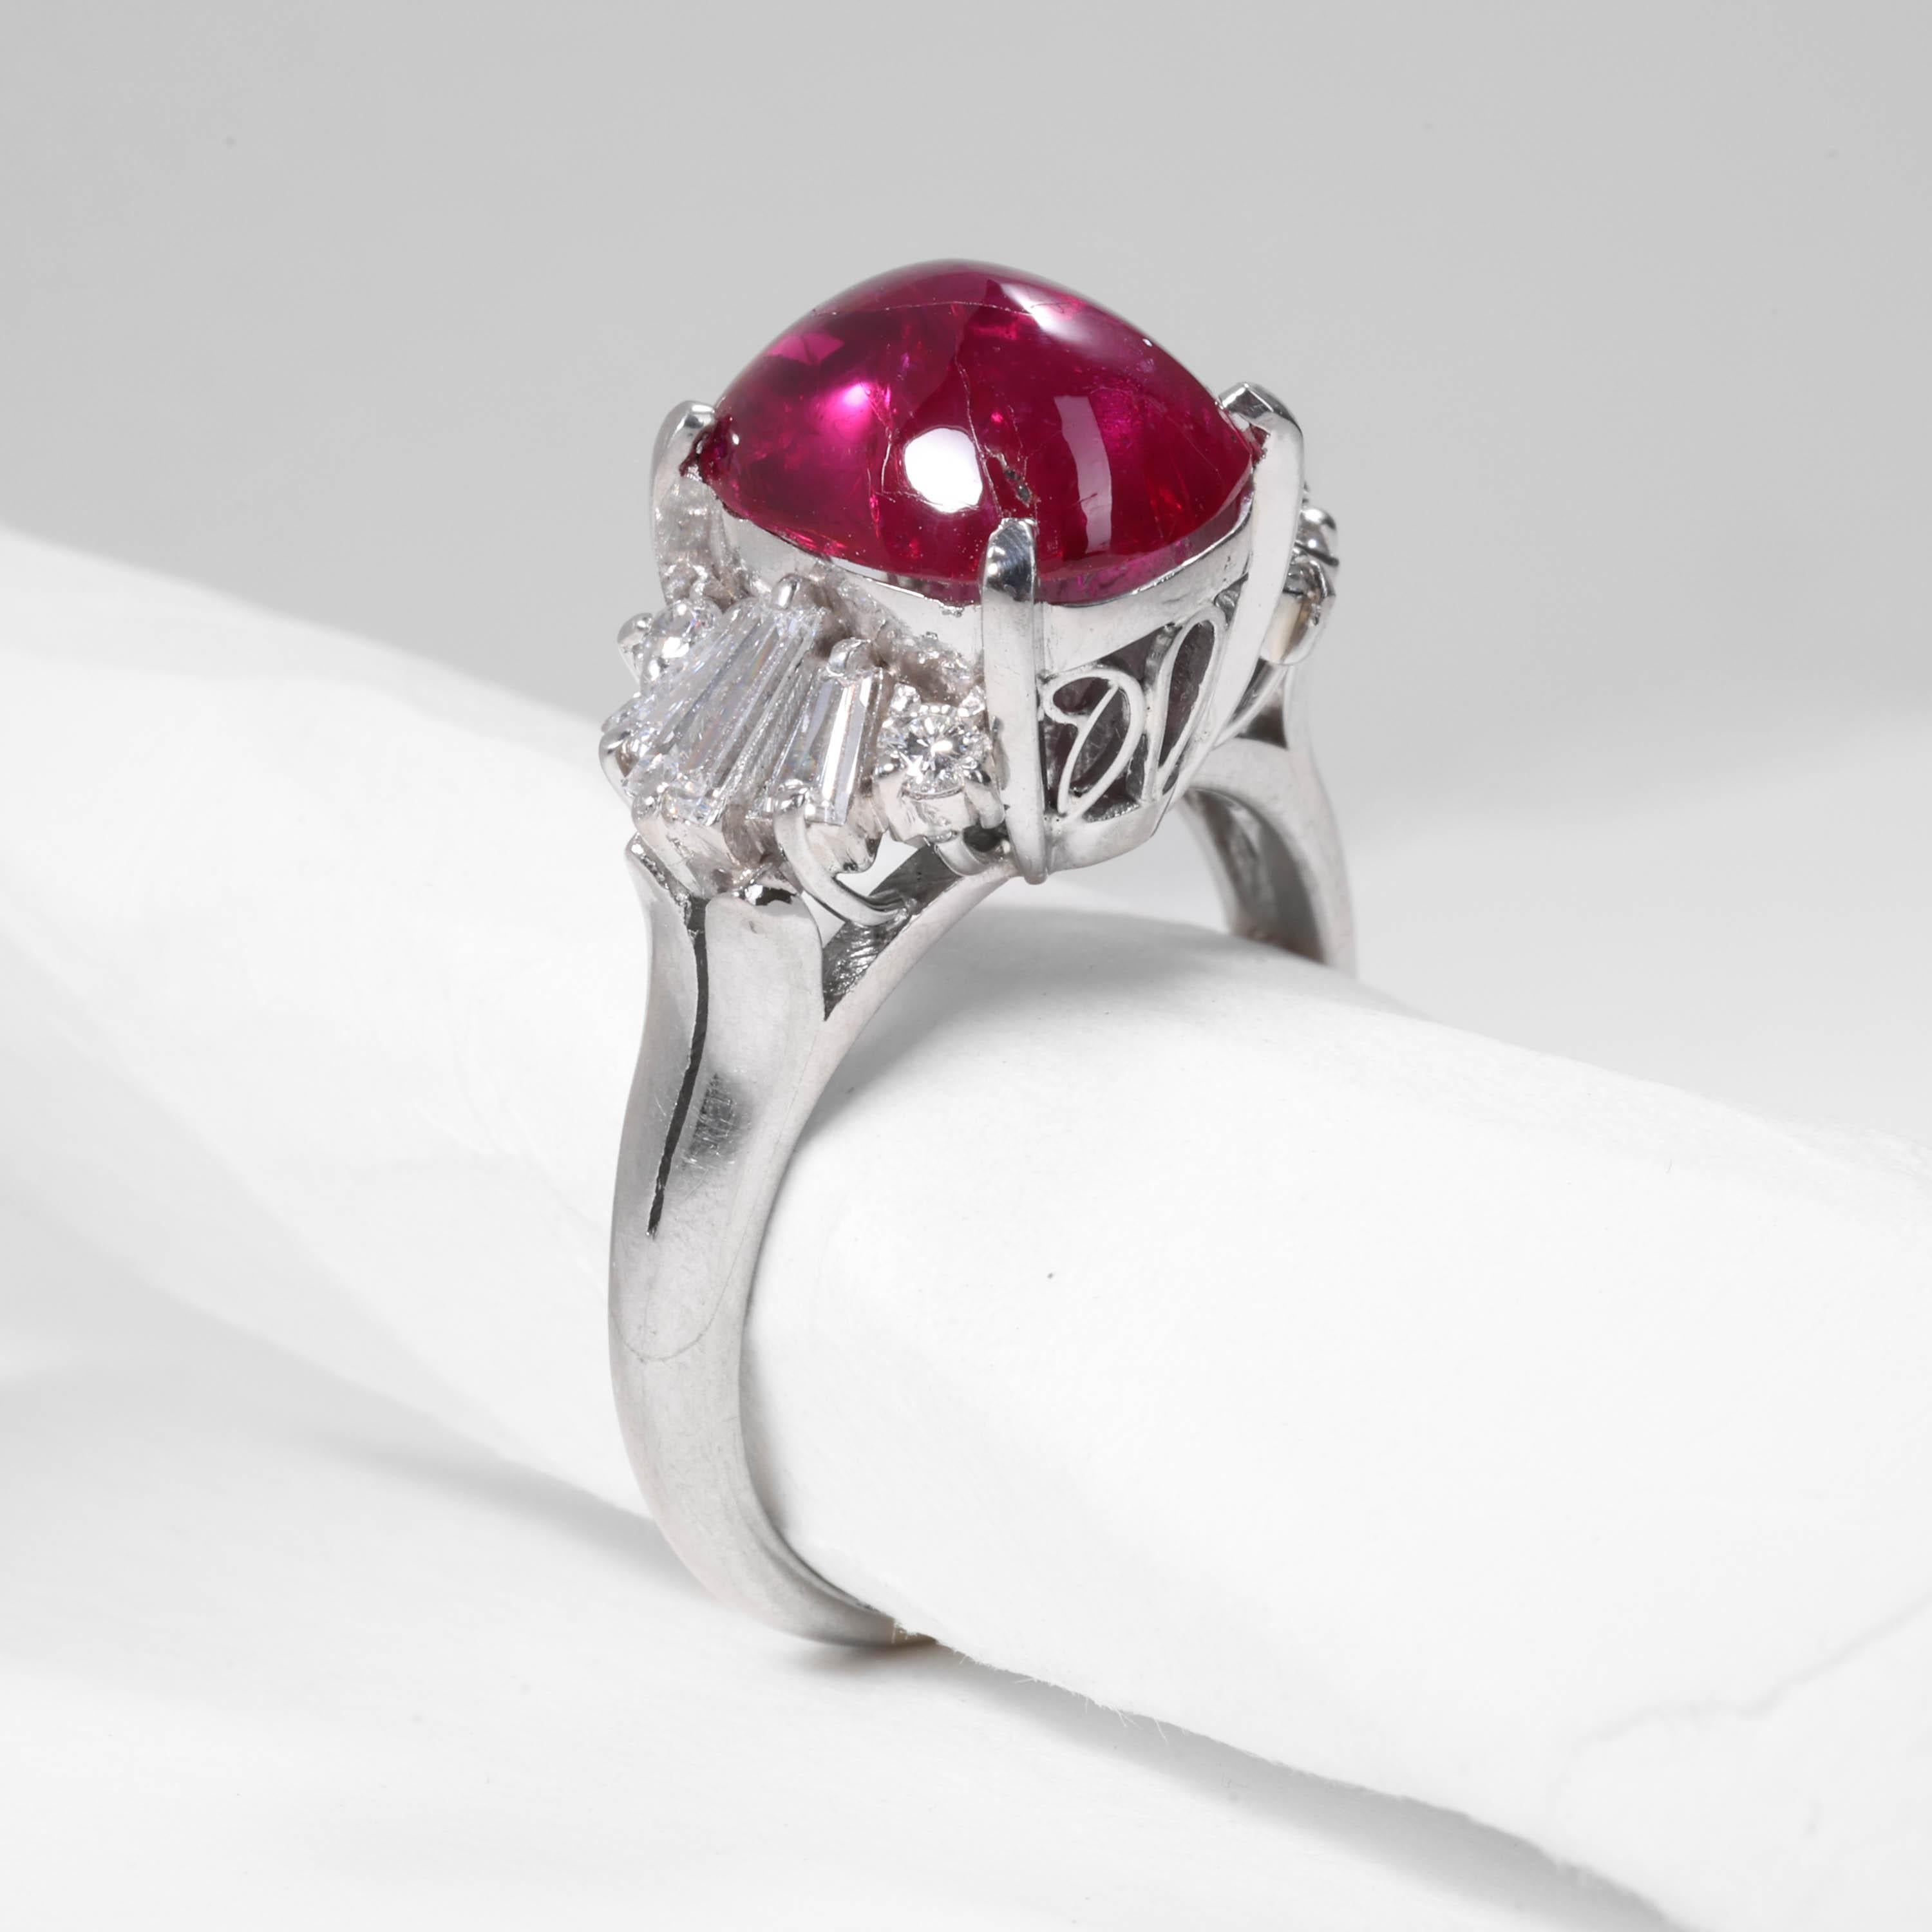 Sugarloaf Cabochon Burma Ruby No-Heat 4.75 Carats Set in Vintage Platinum Mounting, Certified For Sale